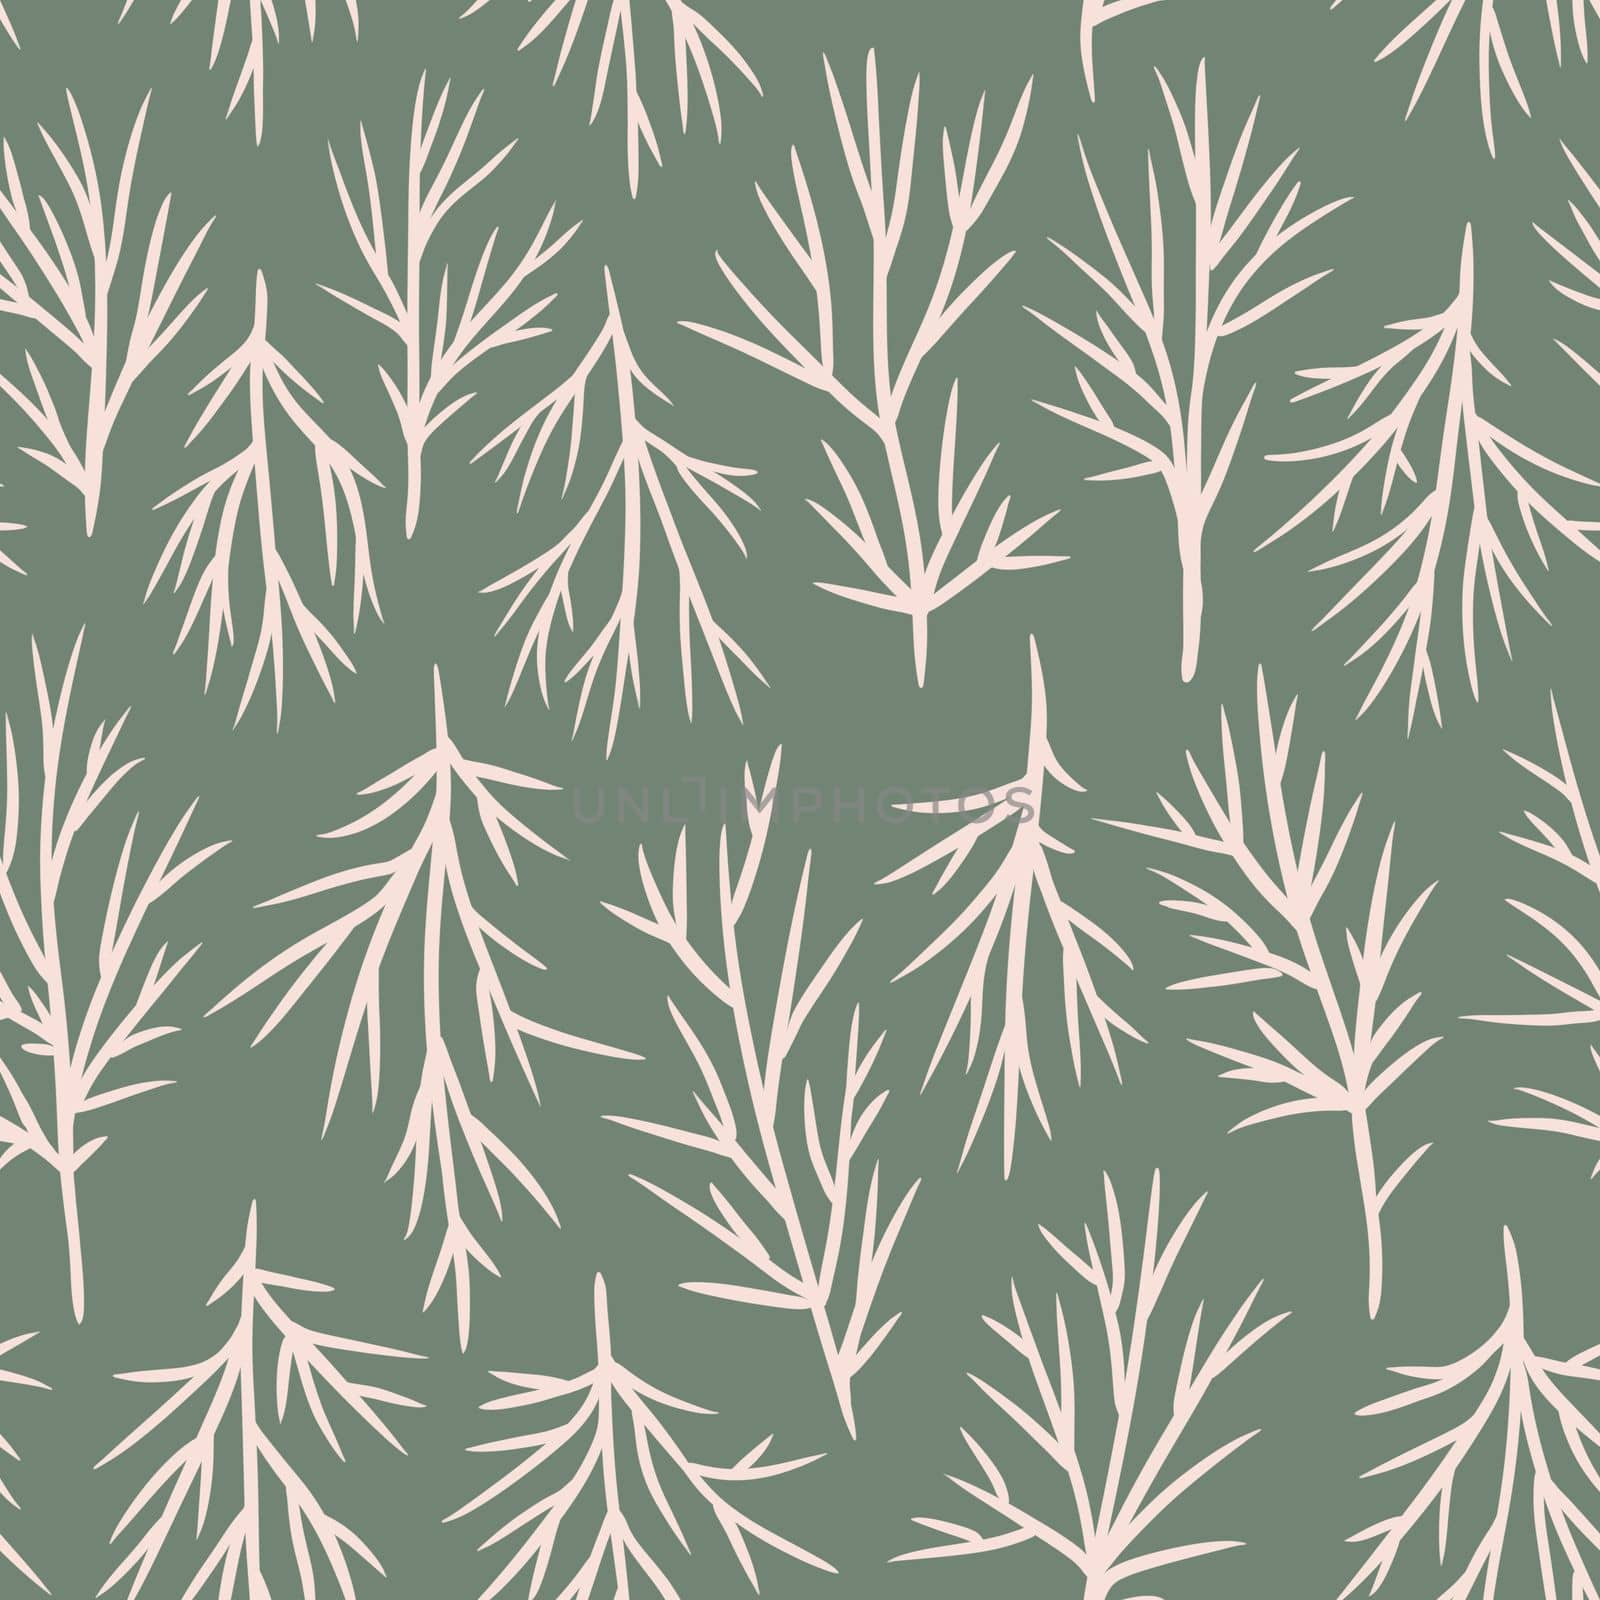 Hand drawn seamless pattern with beige cosmos leaves on sage green background. Elegant minimalist floral foliage on boho bohemian print, pastel muted neutral color, spring garden fabric, simple decoration